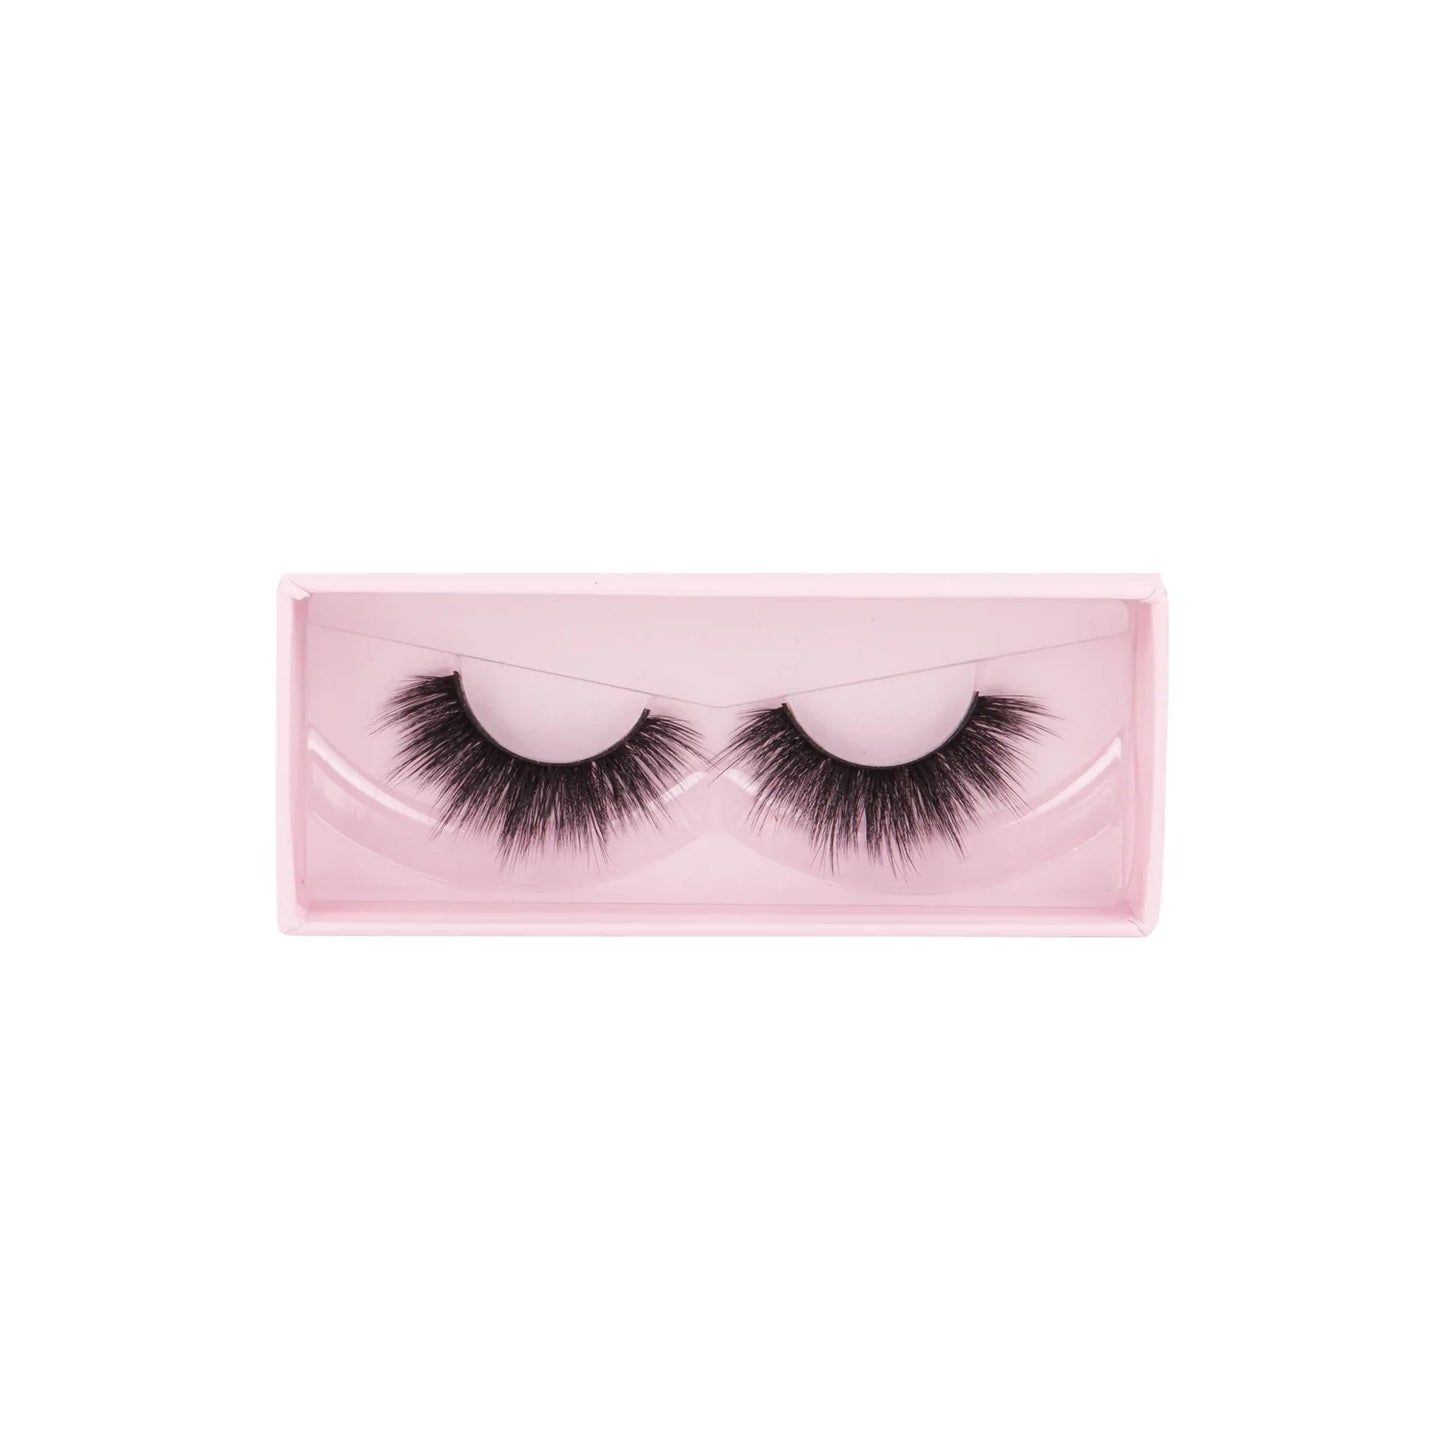 Over Committed - 3D Faux Silk Lashes